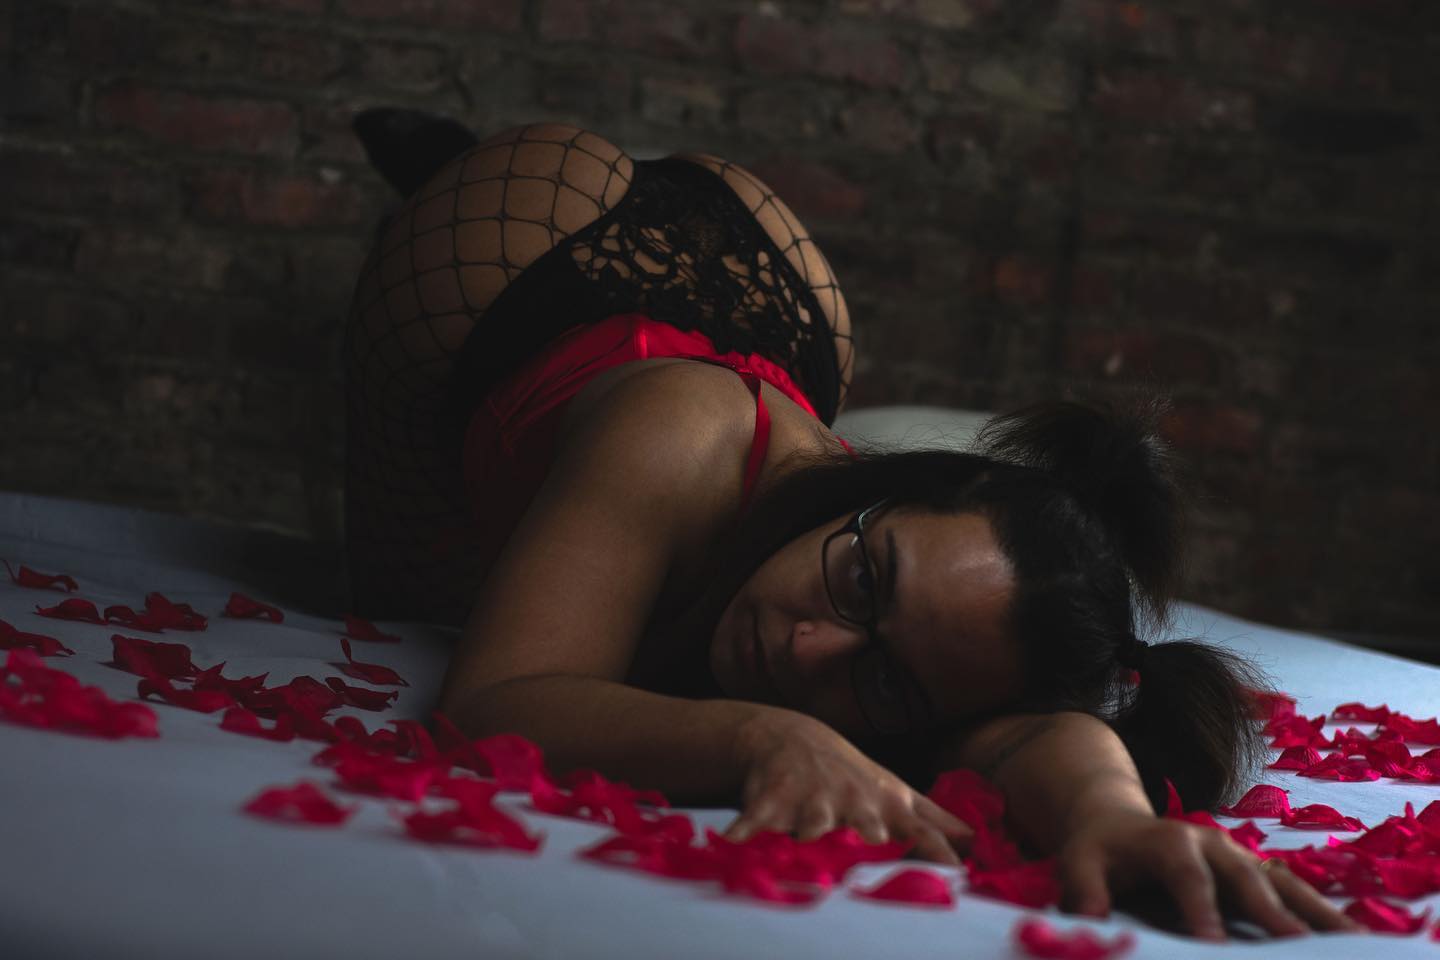 Getting prepared for #valentinesdays 🤍

• book a #boudoir shoot today with @moonlitimages22 and get yourself feelin spicy! ❤️‍🔥🔥

#photoshoot #boudoirphotoshoot #fishnets #corset #valentines #bourdoirphotography #bourdoir #bourdoirphotos